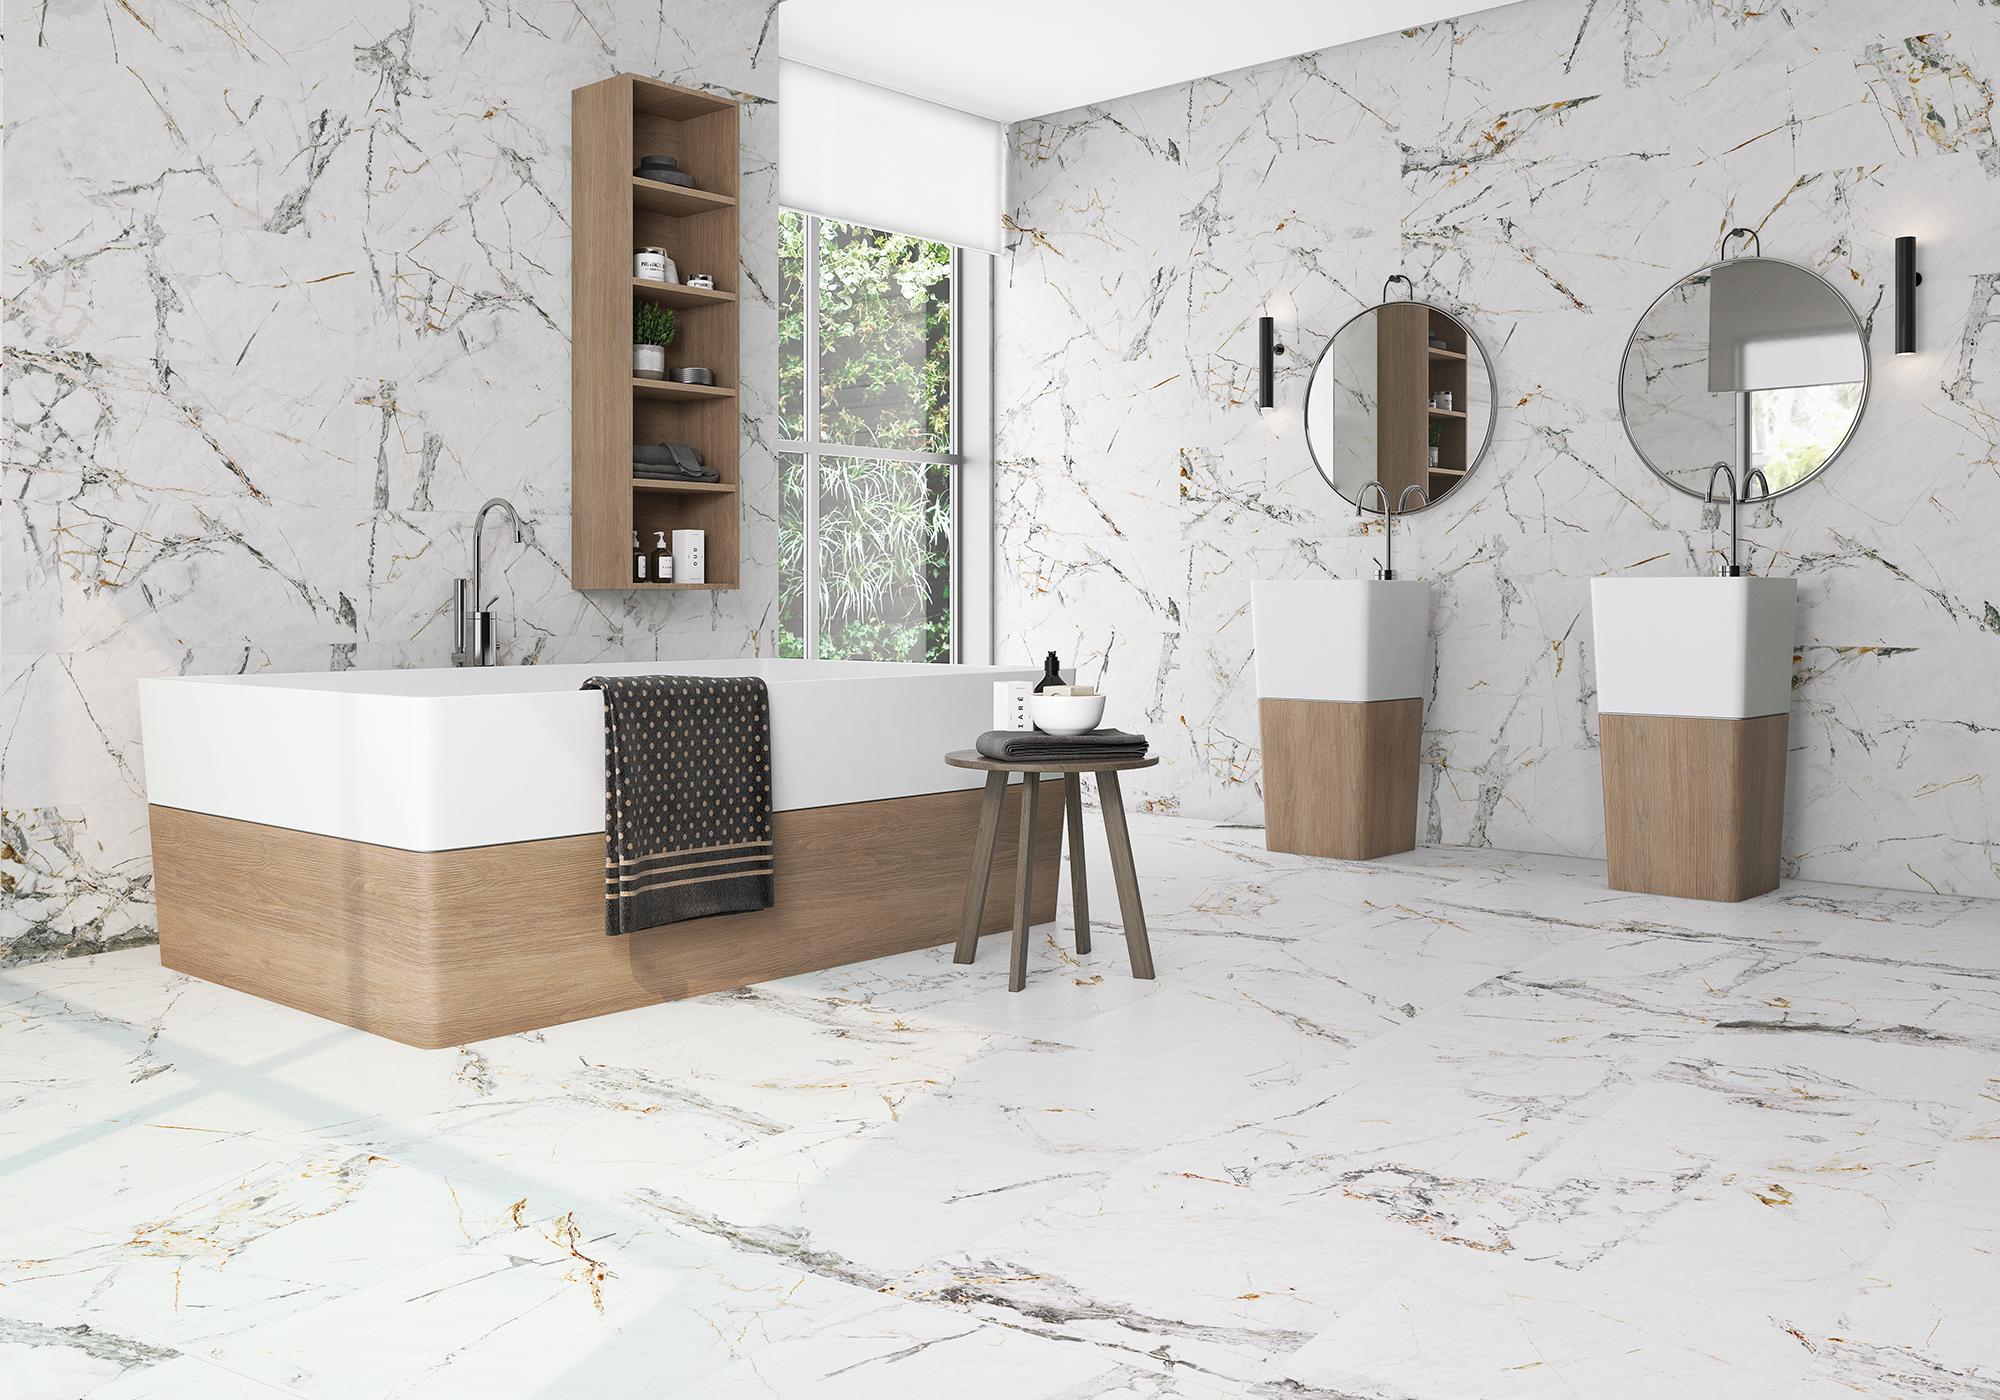 <h2>Discover our extensive range of Tiles, <br>Bathroom Ware and Wood Flooring</h2><p>From Classic to Modern Styles</p> SHOWROOM OPEN, OPENING HOURS : MONDAY - SATURDAY 10AM - 5PM